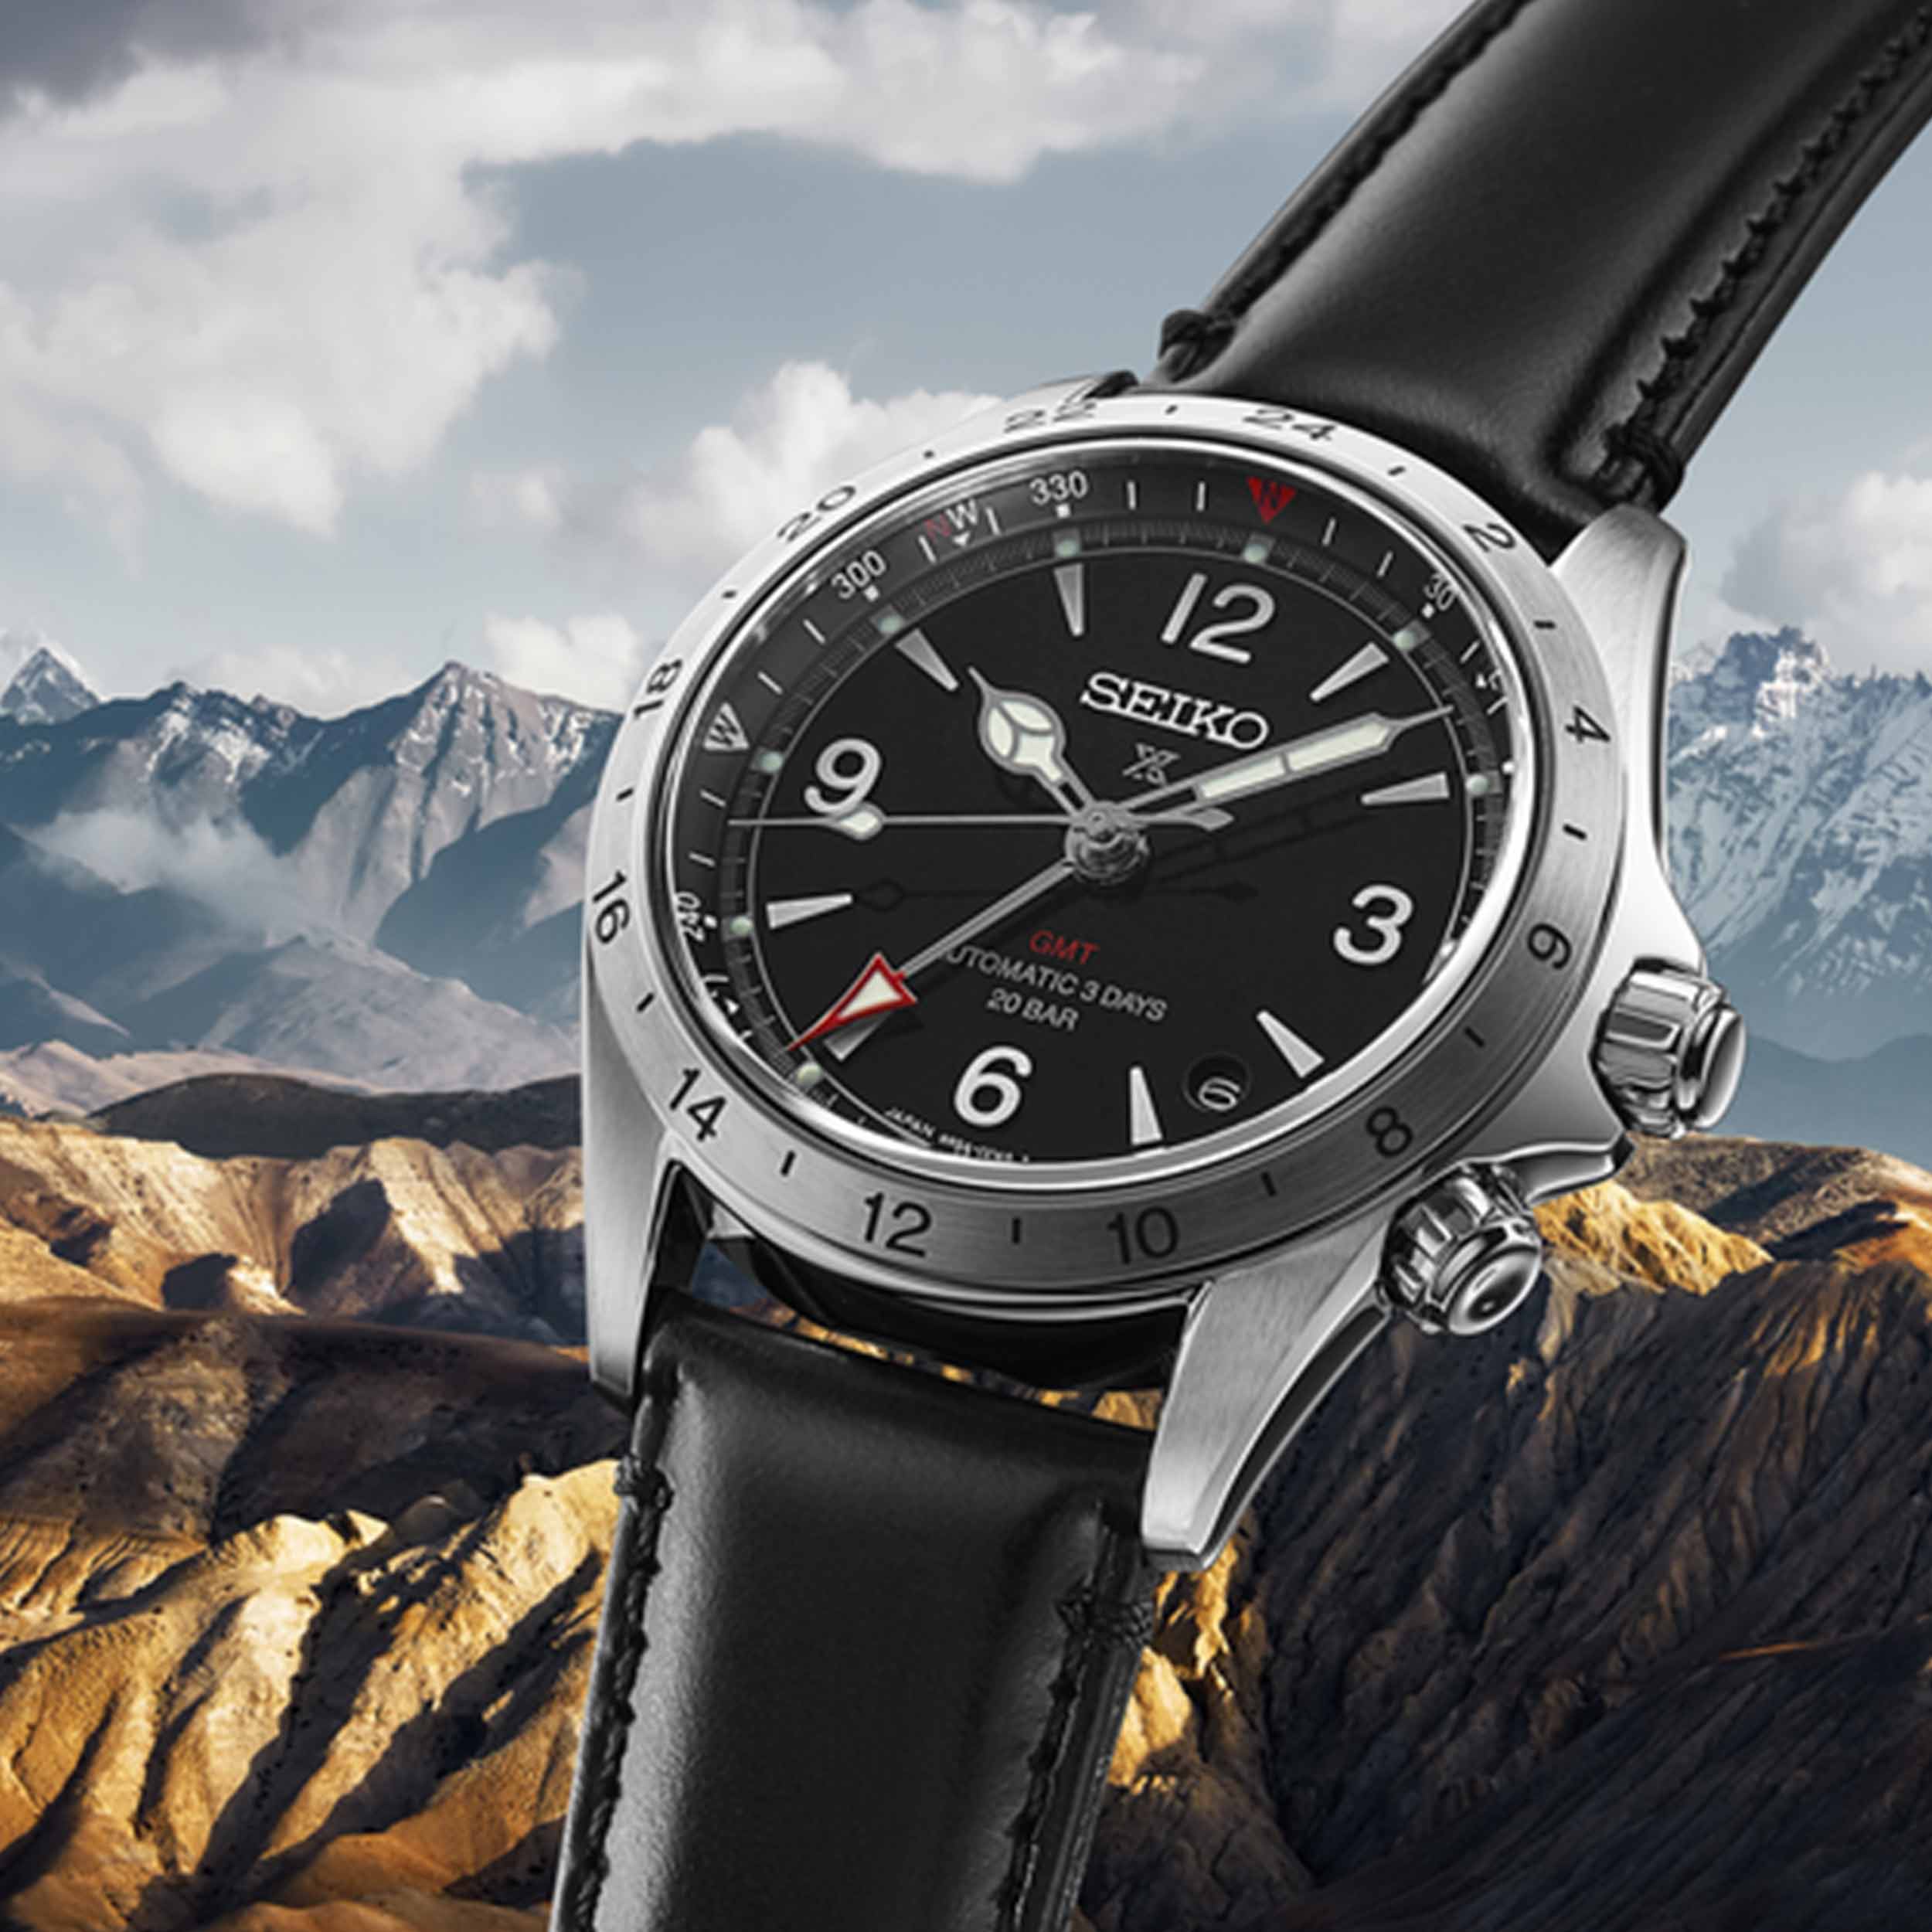 Seiko Brings the 6R54 GMT Caliber to the Alpinist Family - Worn & Wound